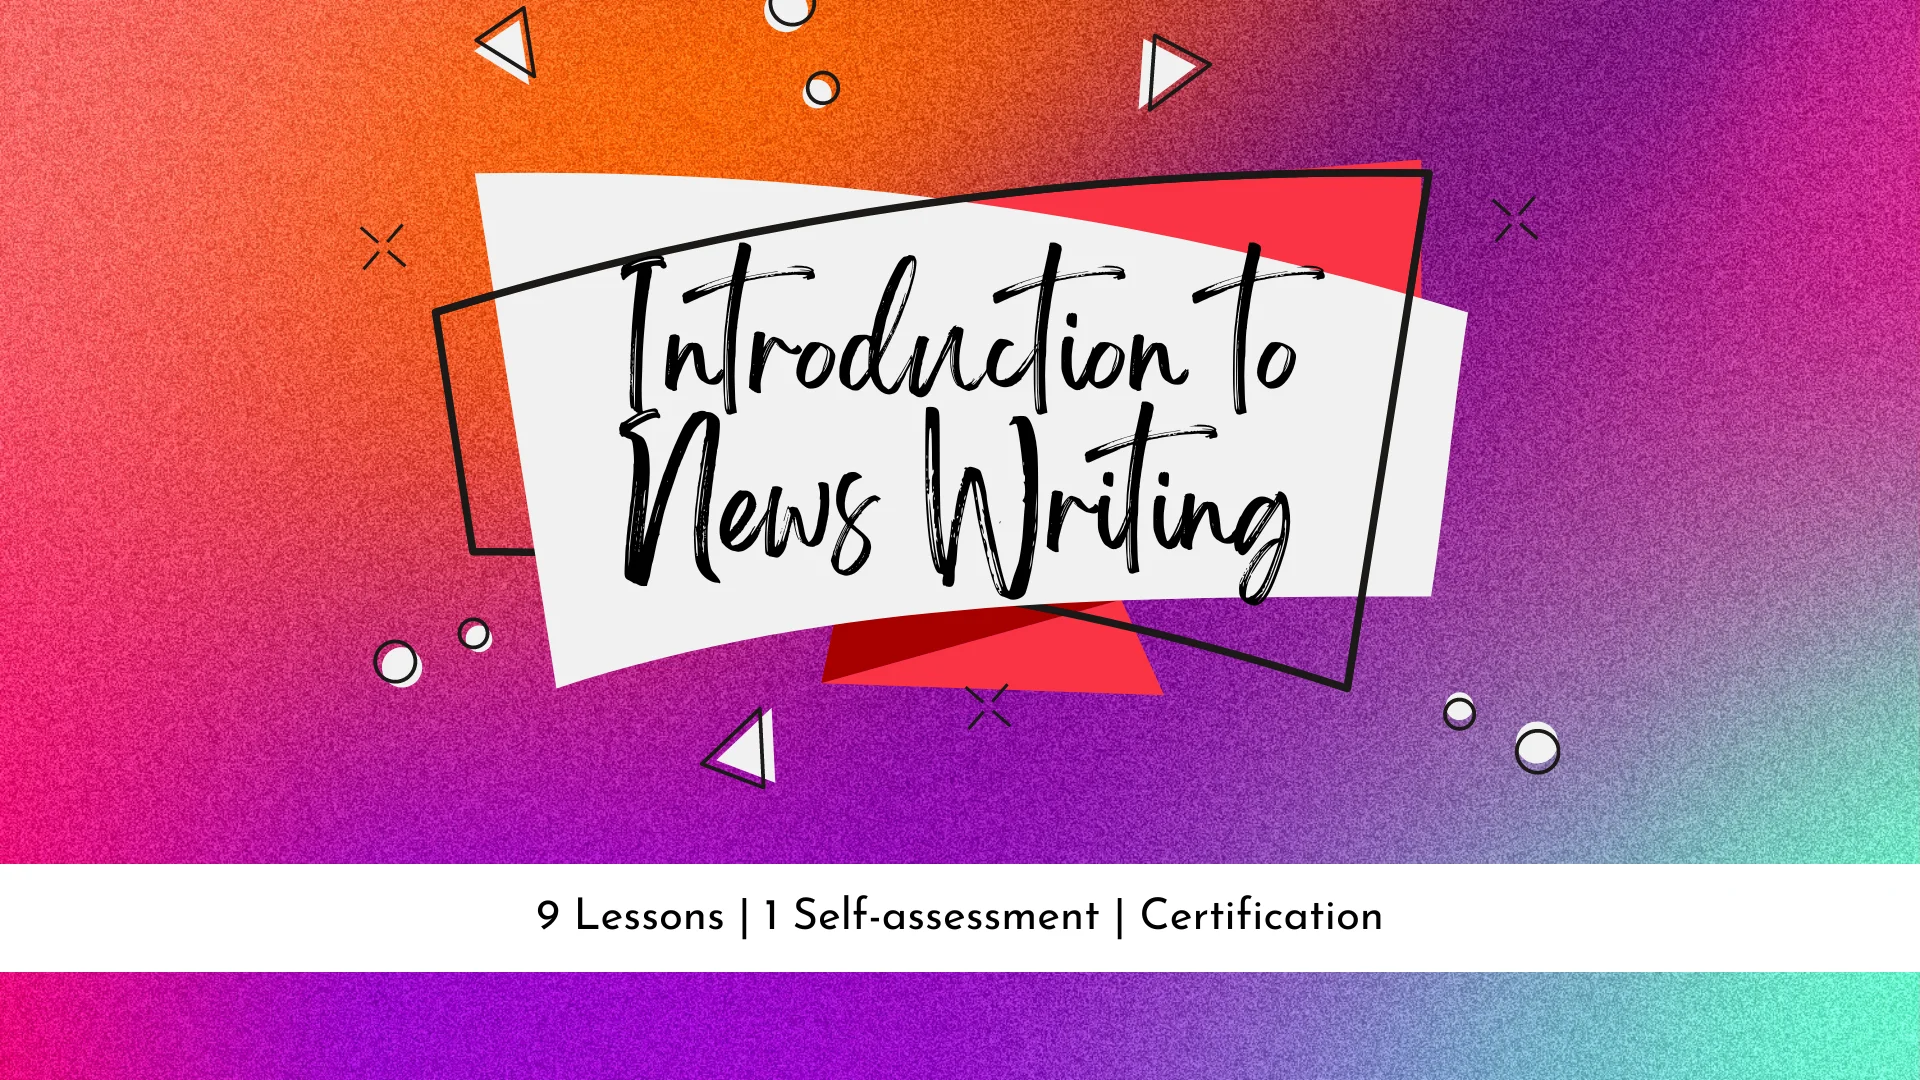 Introduction to News Writing Course Image